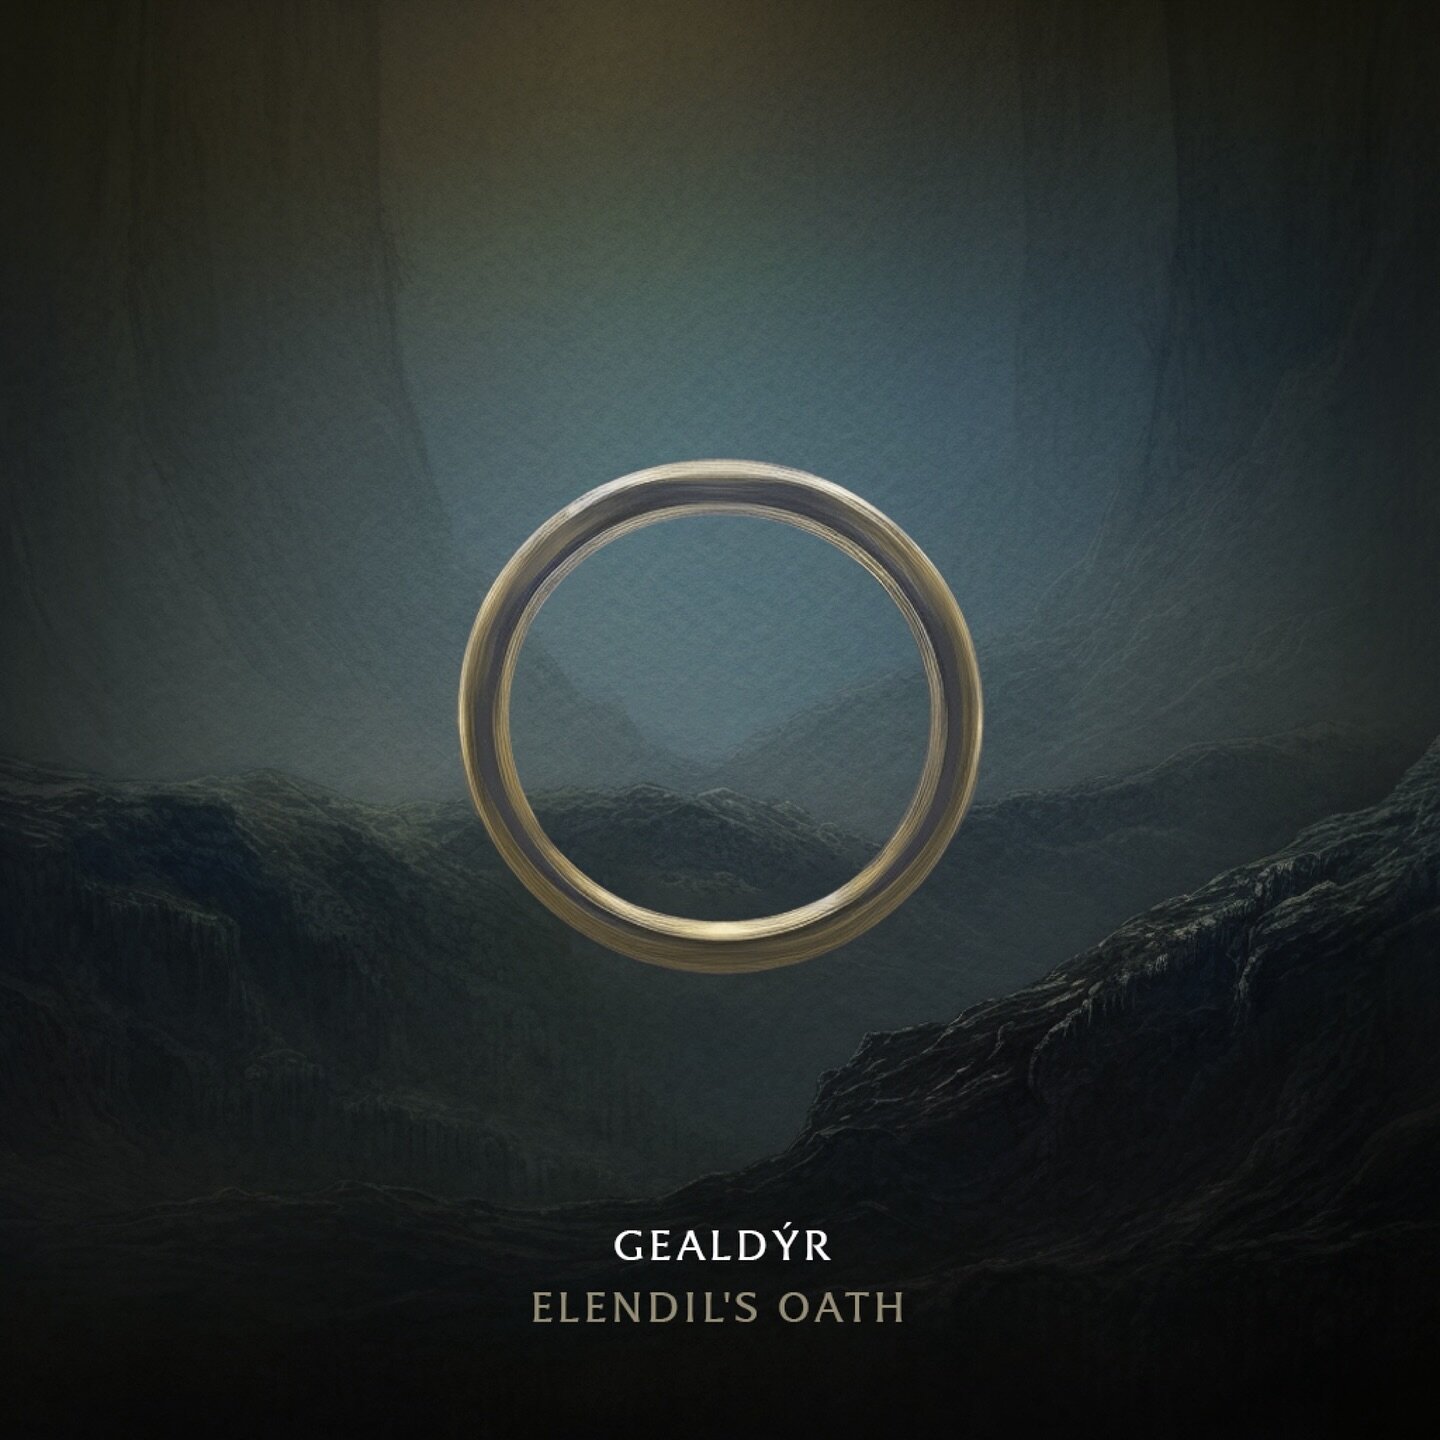 Elendil&rsquo;s Oath is now available on all digital platforms!

Elendil&rsquo;s Oath is a cover of one of the songs sung by Aragorn in The Lord of the Rings. The song itself is sung in the Elvish language Quenya, one of the artificial languages that